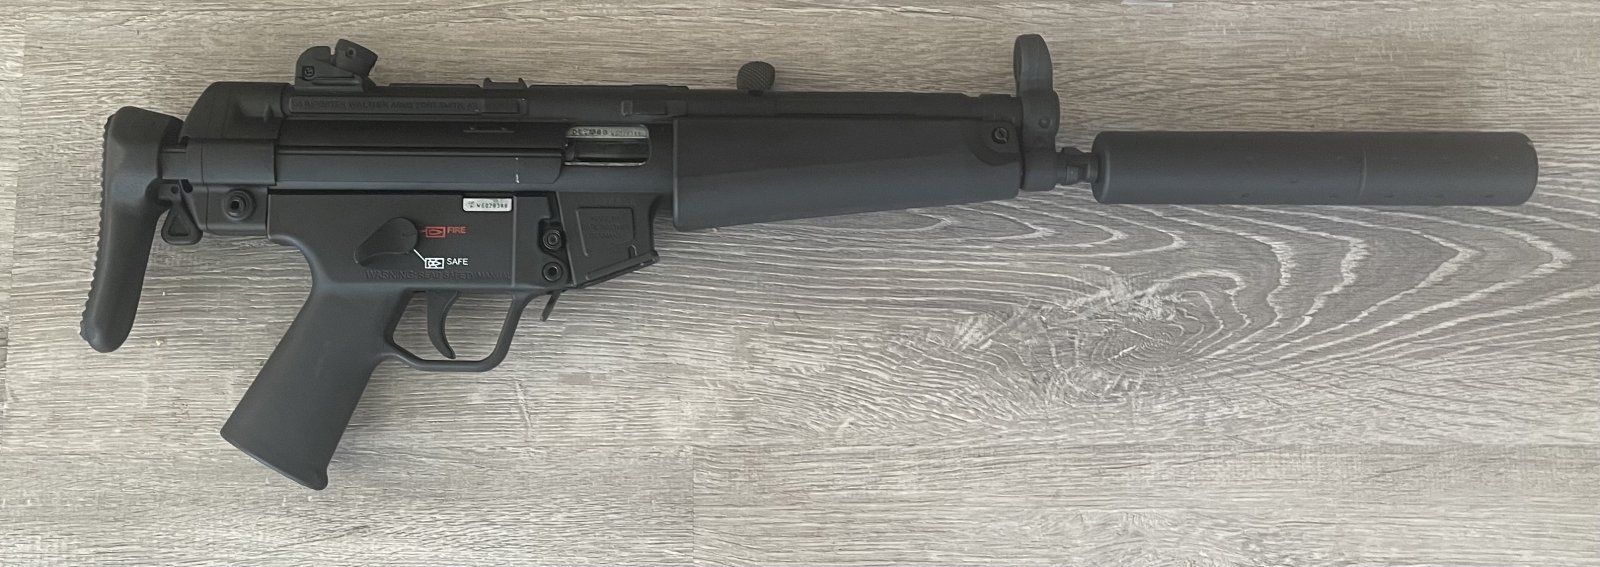 HK MP5 .22 (2 versions) (Magazines also for sale)